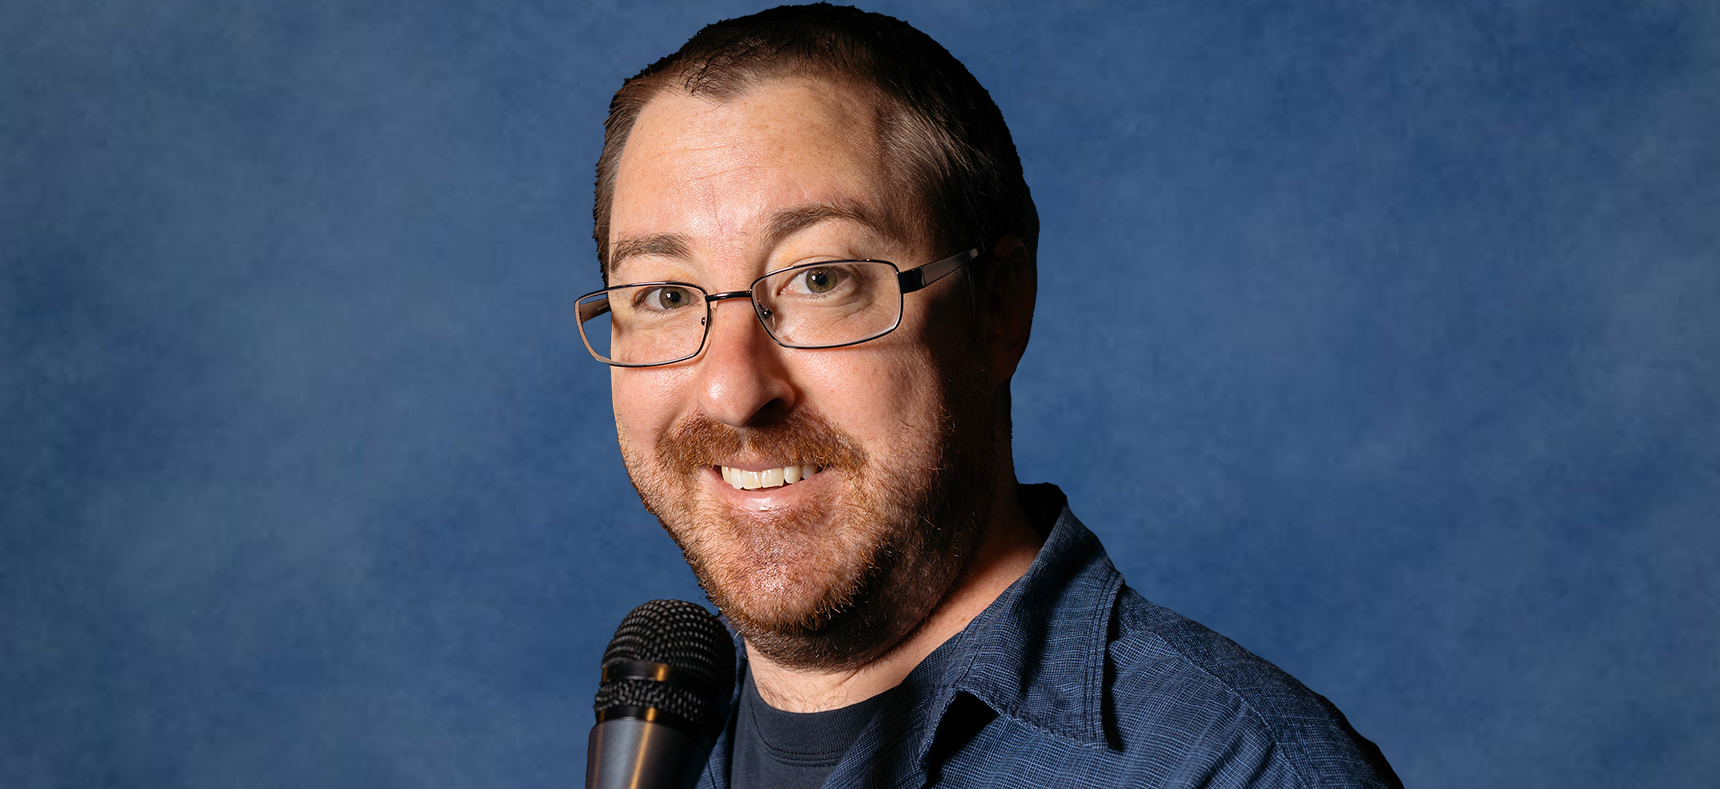 This Friday night at Comedy Heights at Bay Bridge Brewing we bring the funny with Jeff Bilodeau!